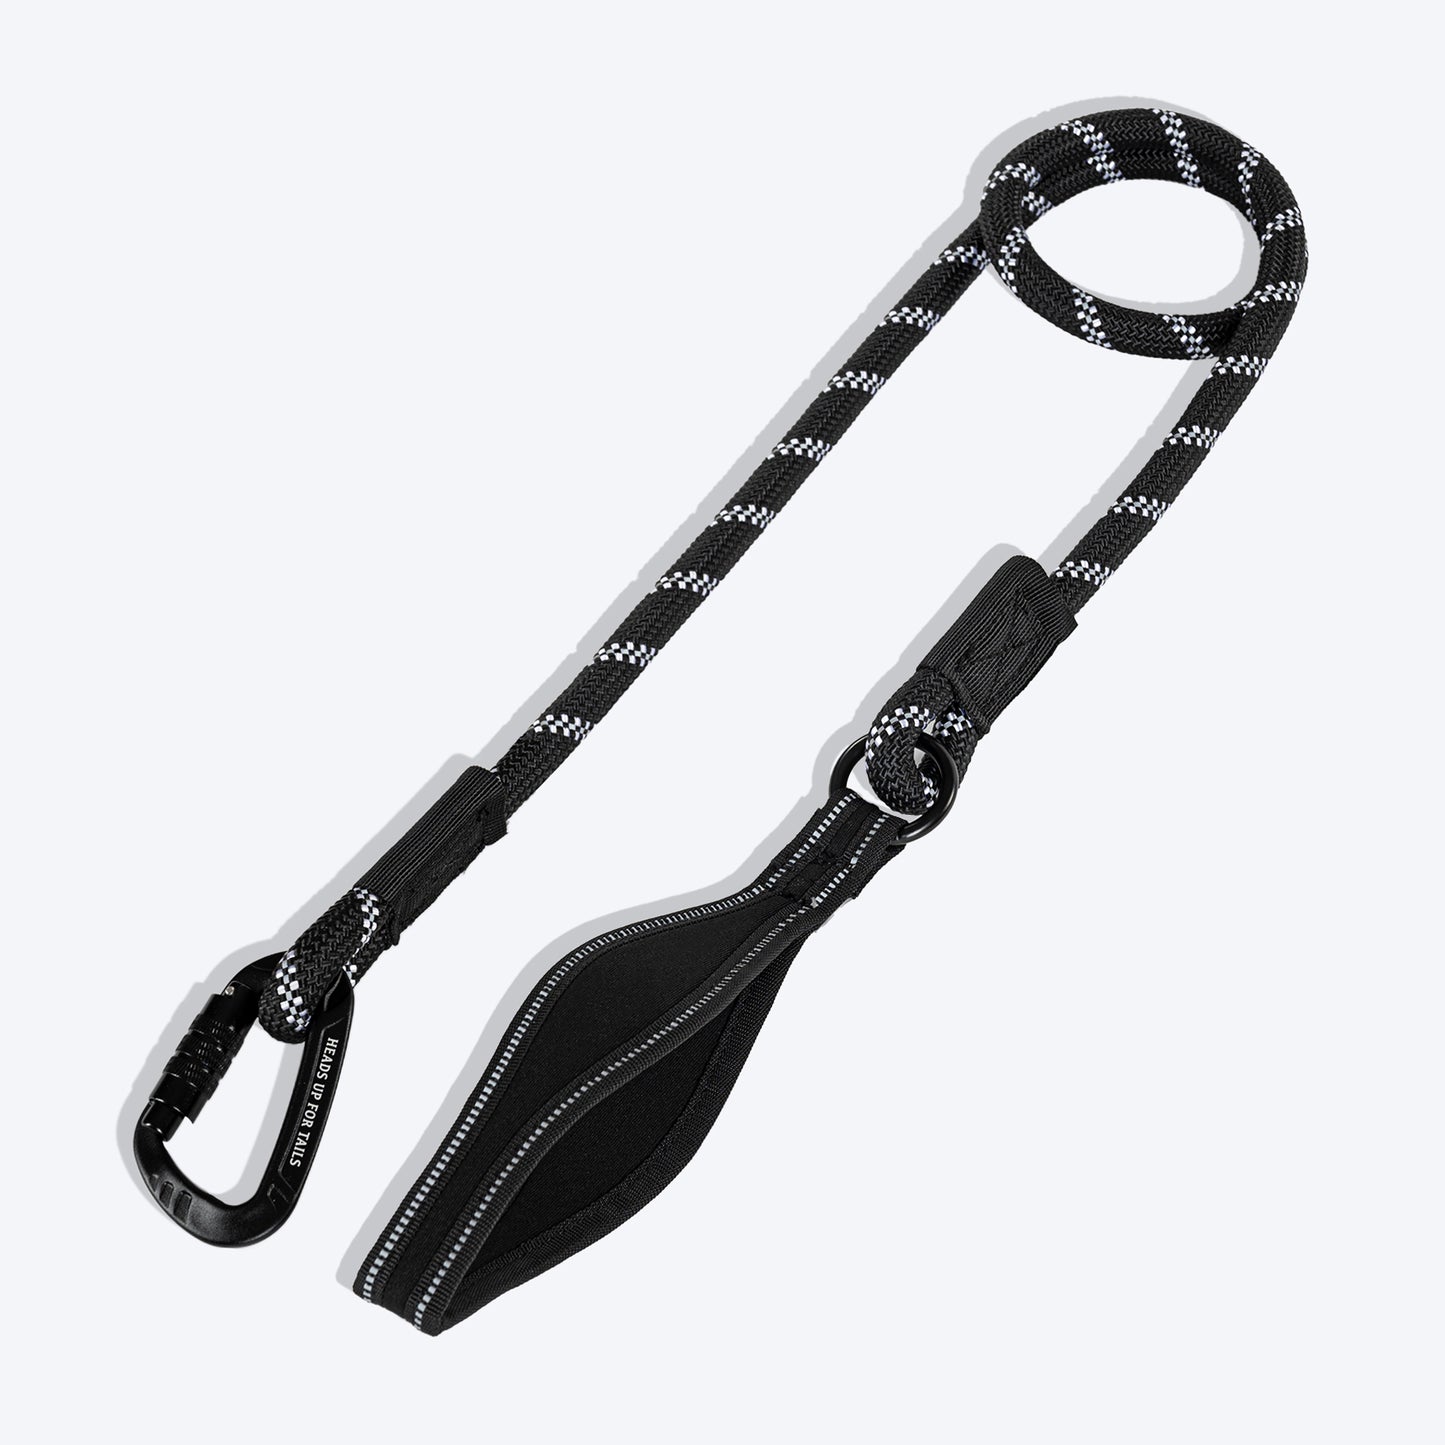 HUFT Rope Leash With Carabiner For Dog - Black - 1.2 m - Heads Up For Tails